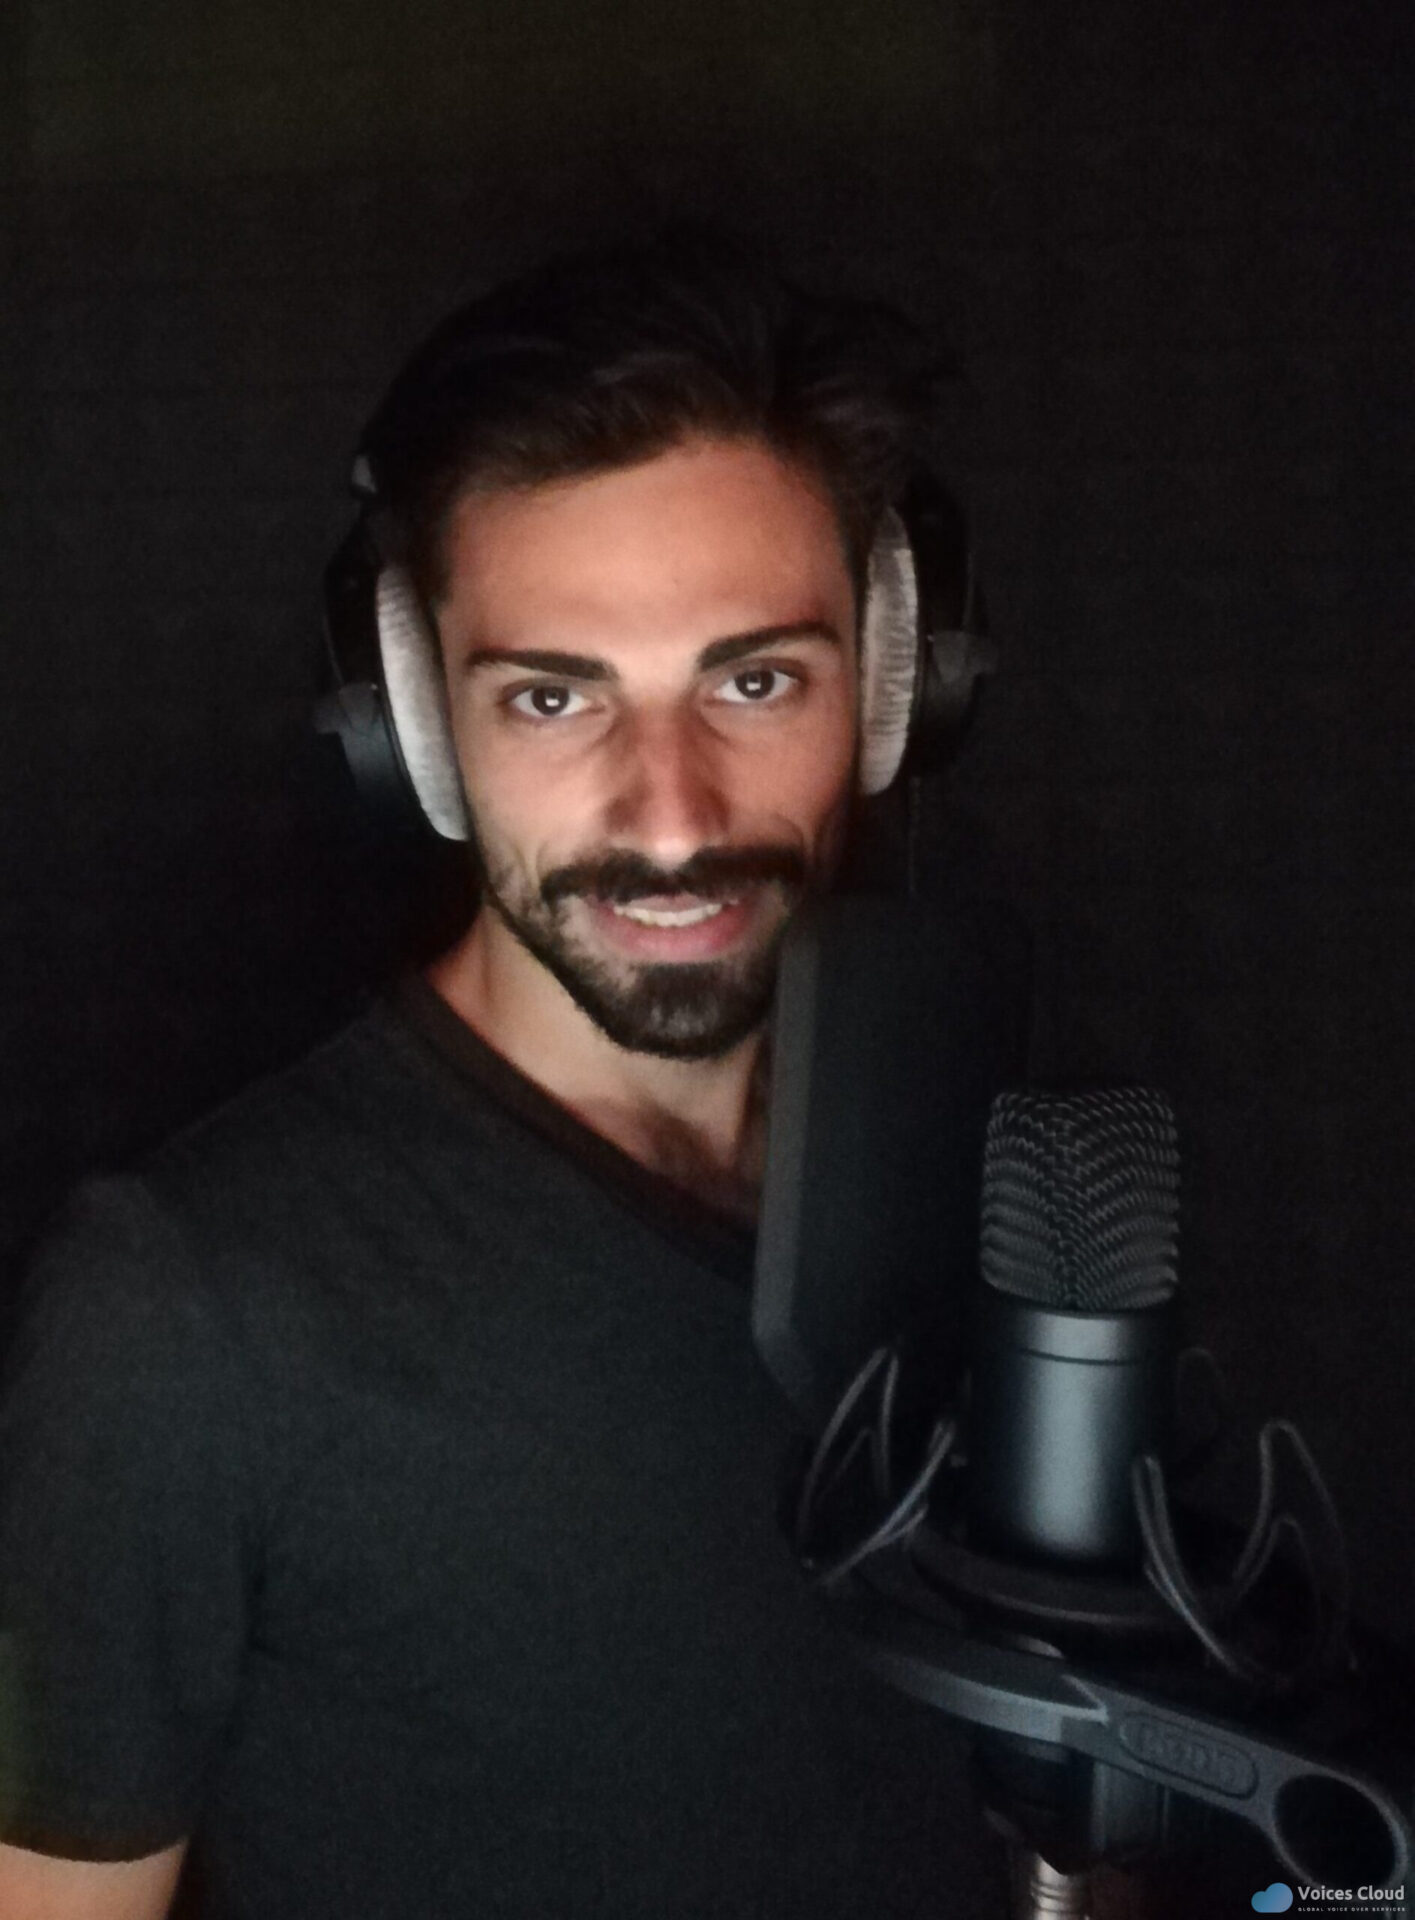 14362Professionally record a voice over in greek impersonating lots of characters